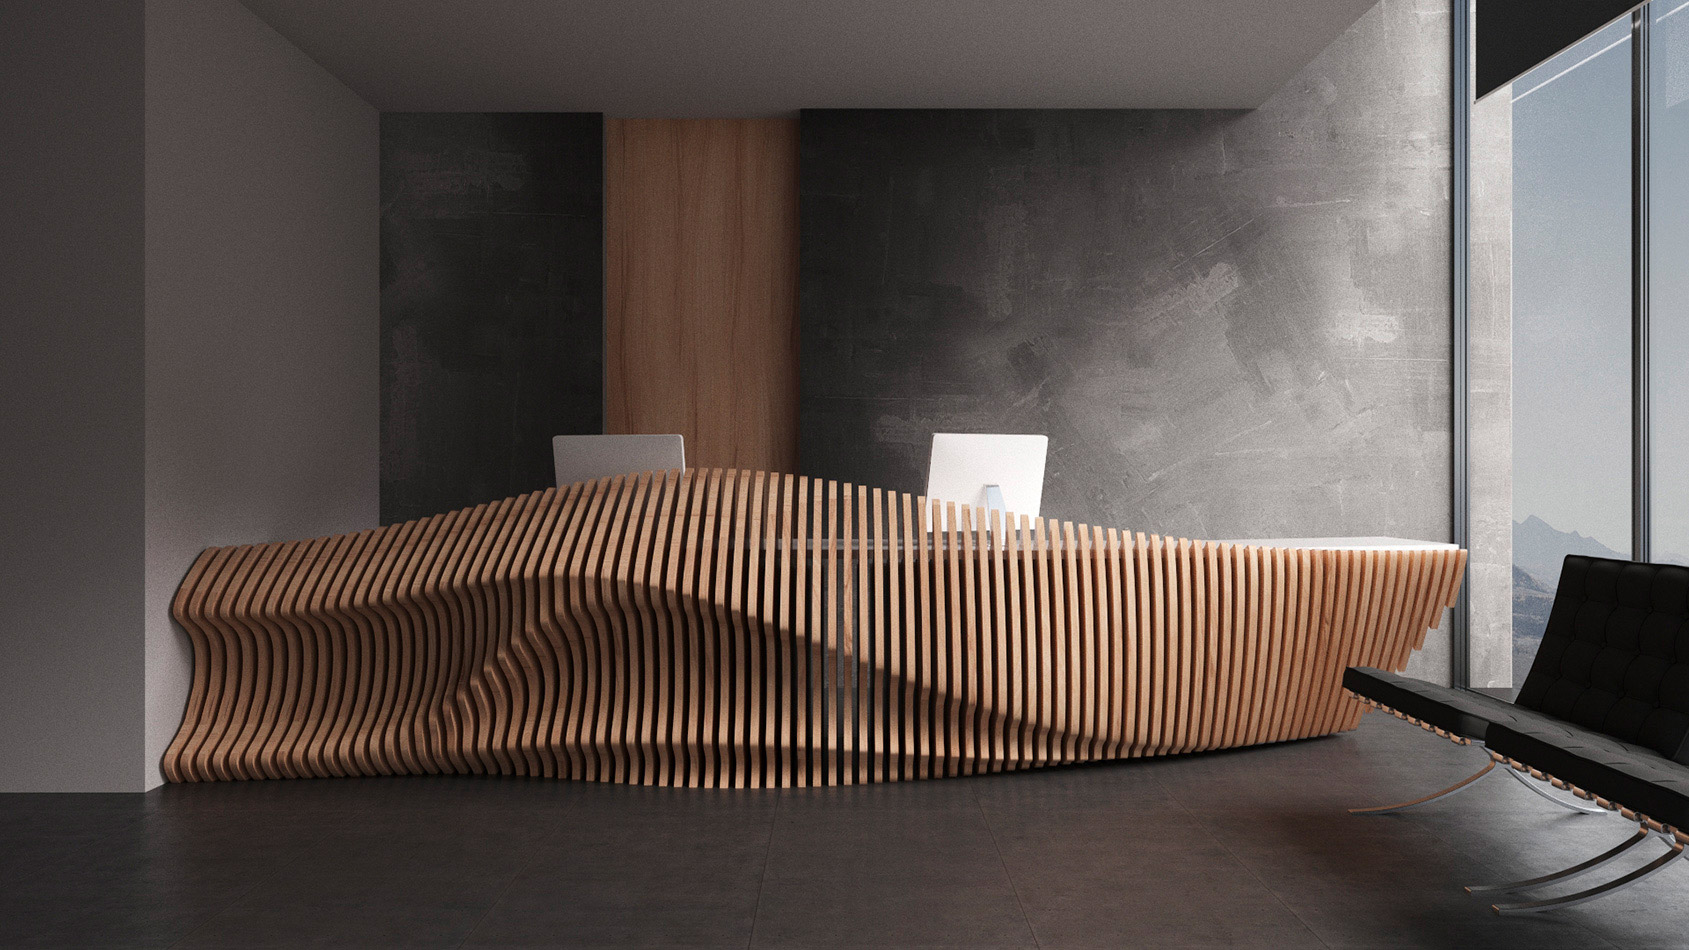 Waves Fluid Furniture Designs by Parametric Daily